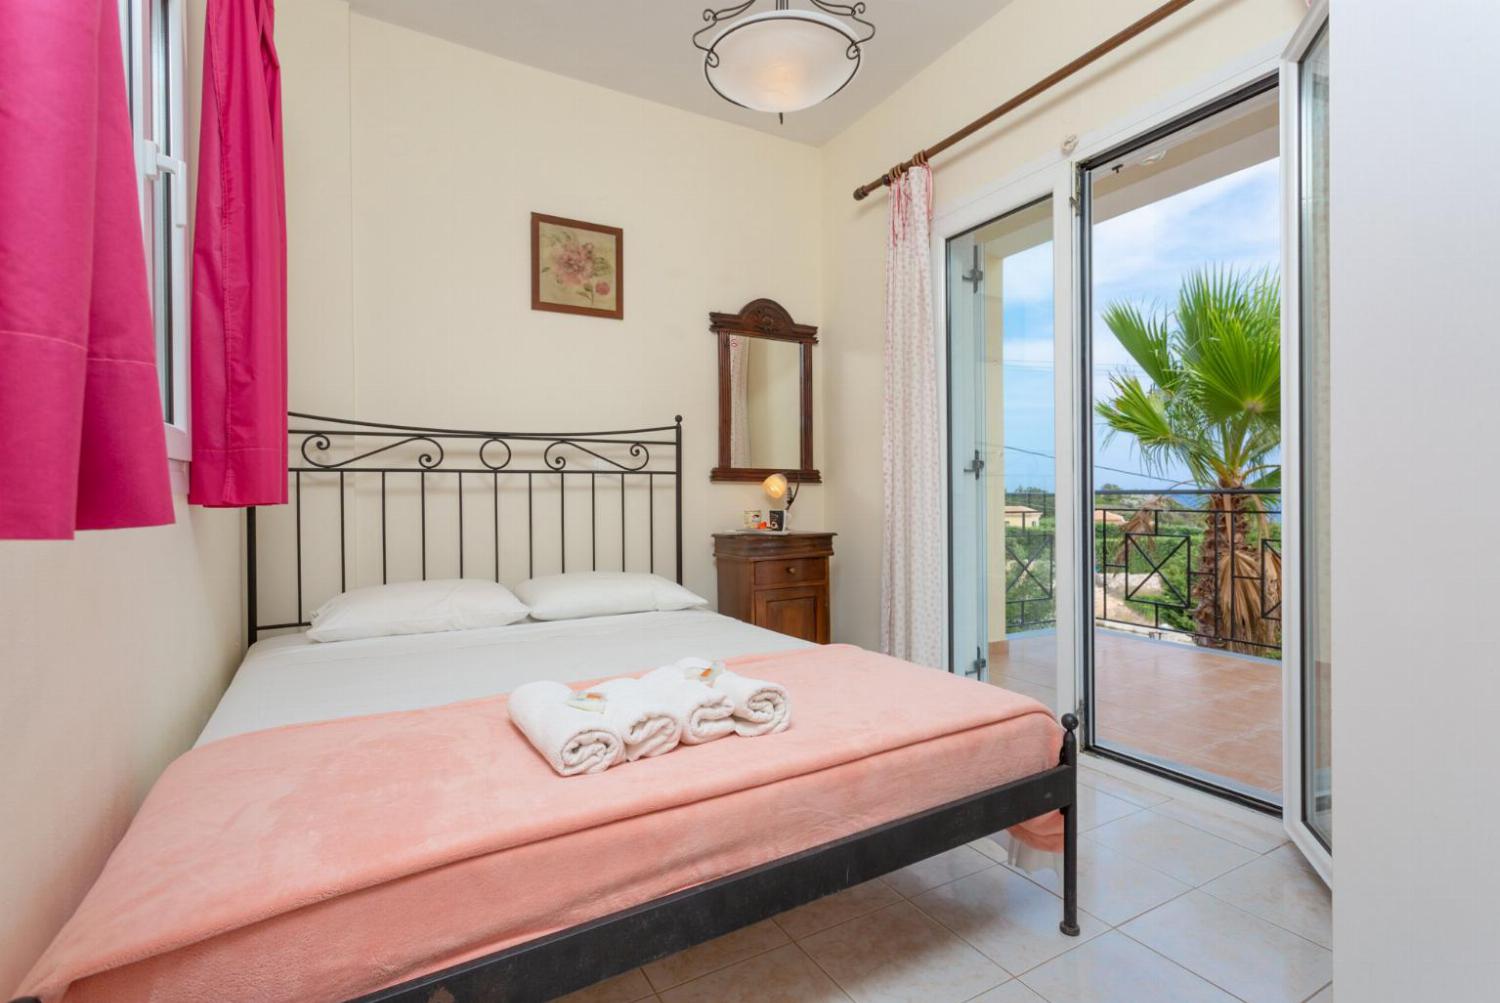 Double bedroom on first floor with A/C, and balcony access with sea views